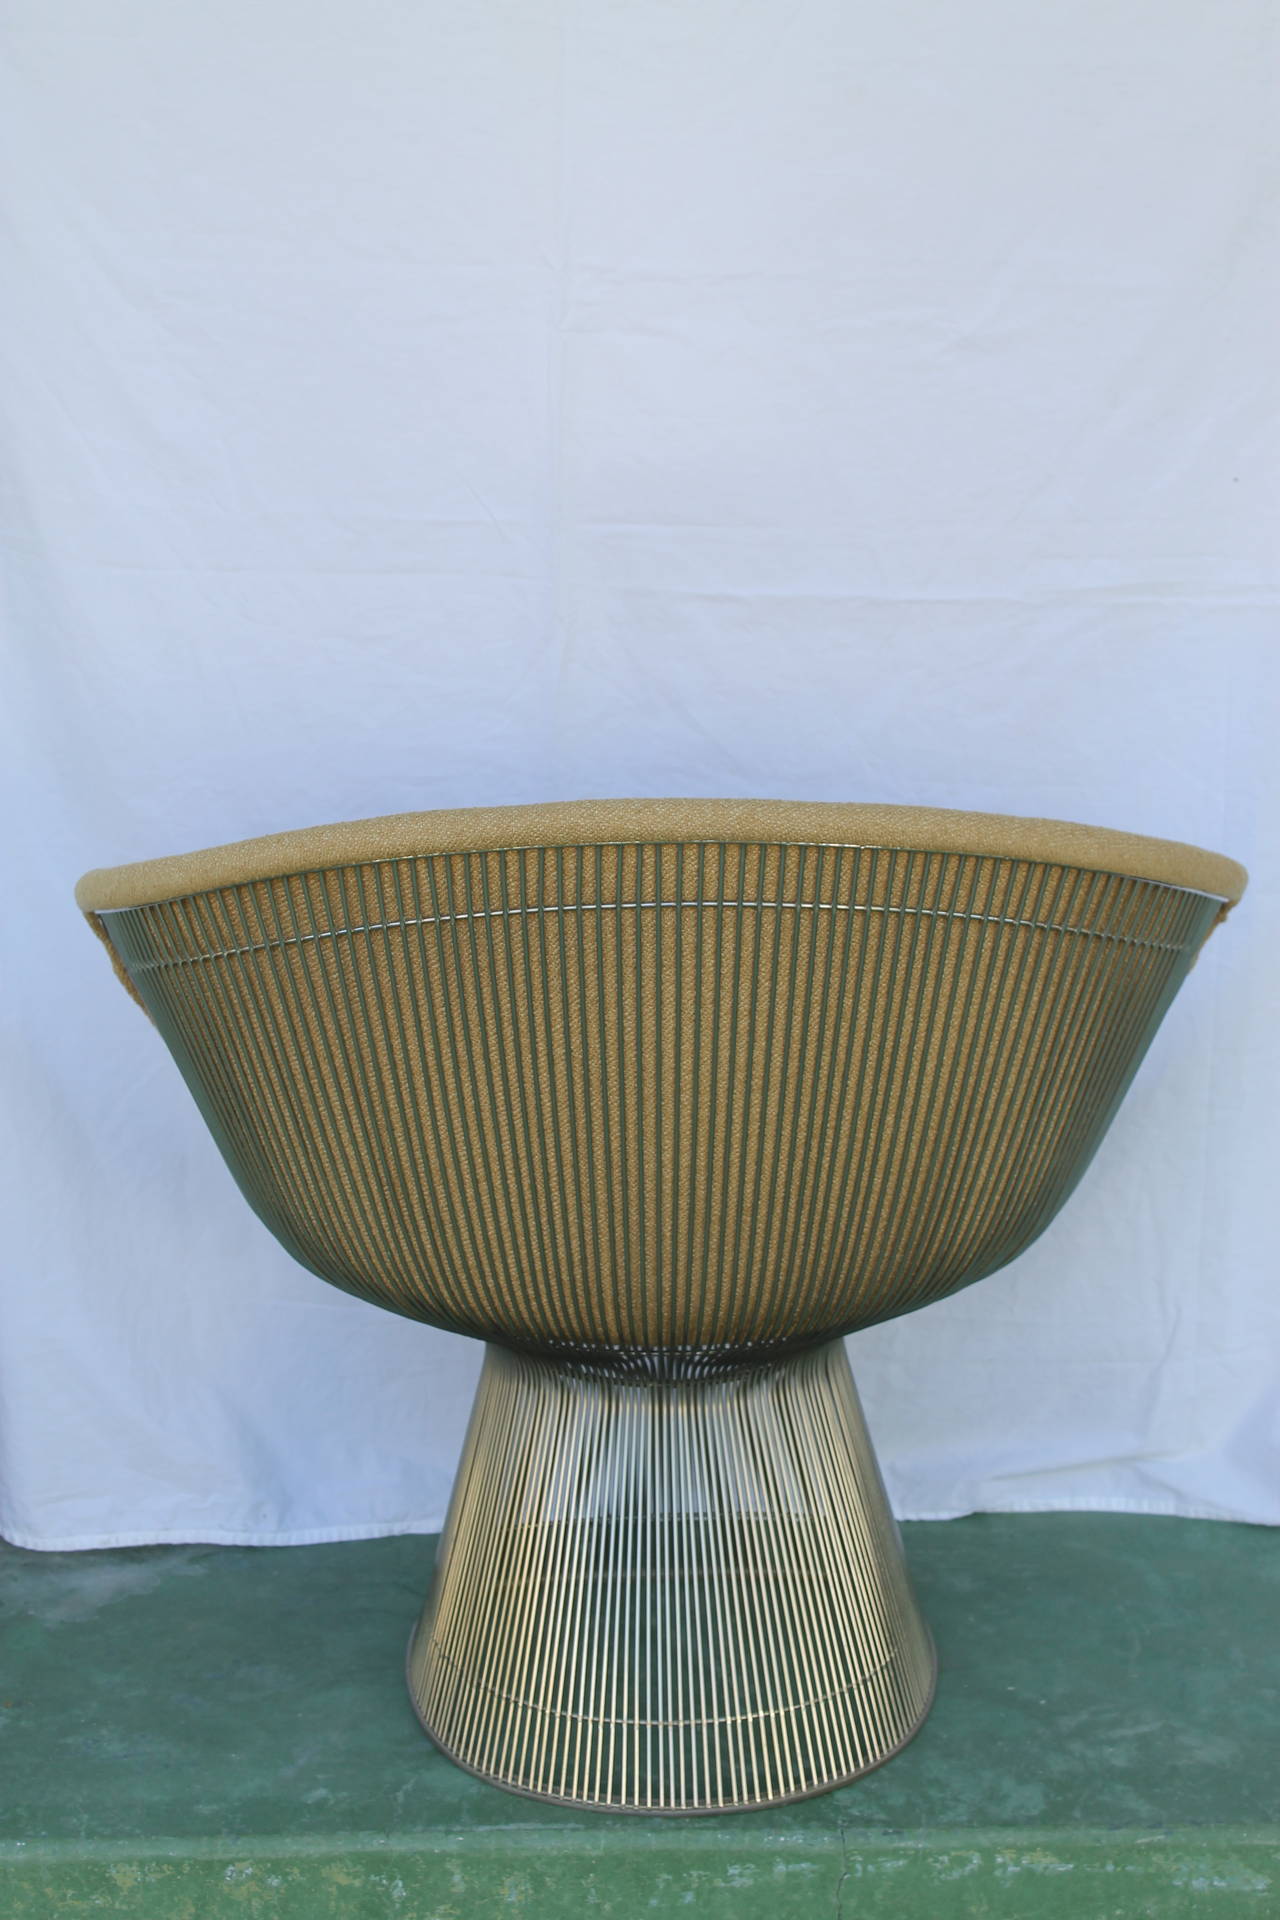 Fresh from a Thunderbird Cove, Palm Springs California estate, a Warren Platner lounge chair with original wheat colored upholstery and nickel finished frame. Excellent original condition. Height 30 1/2